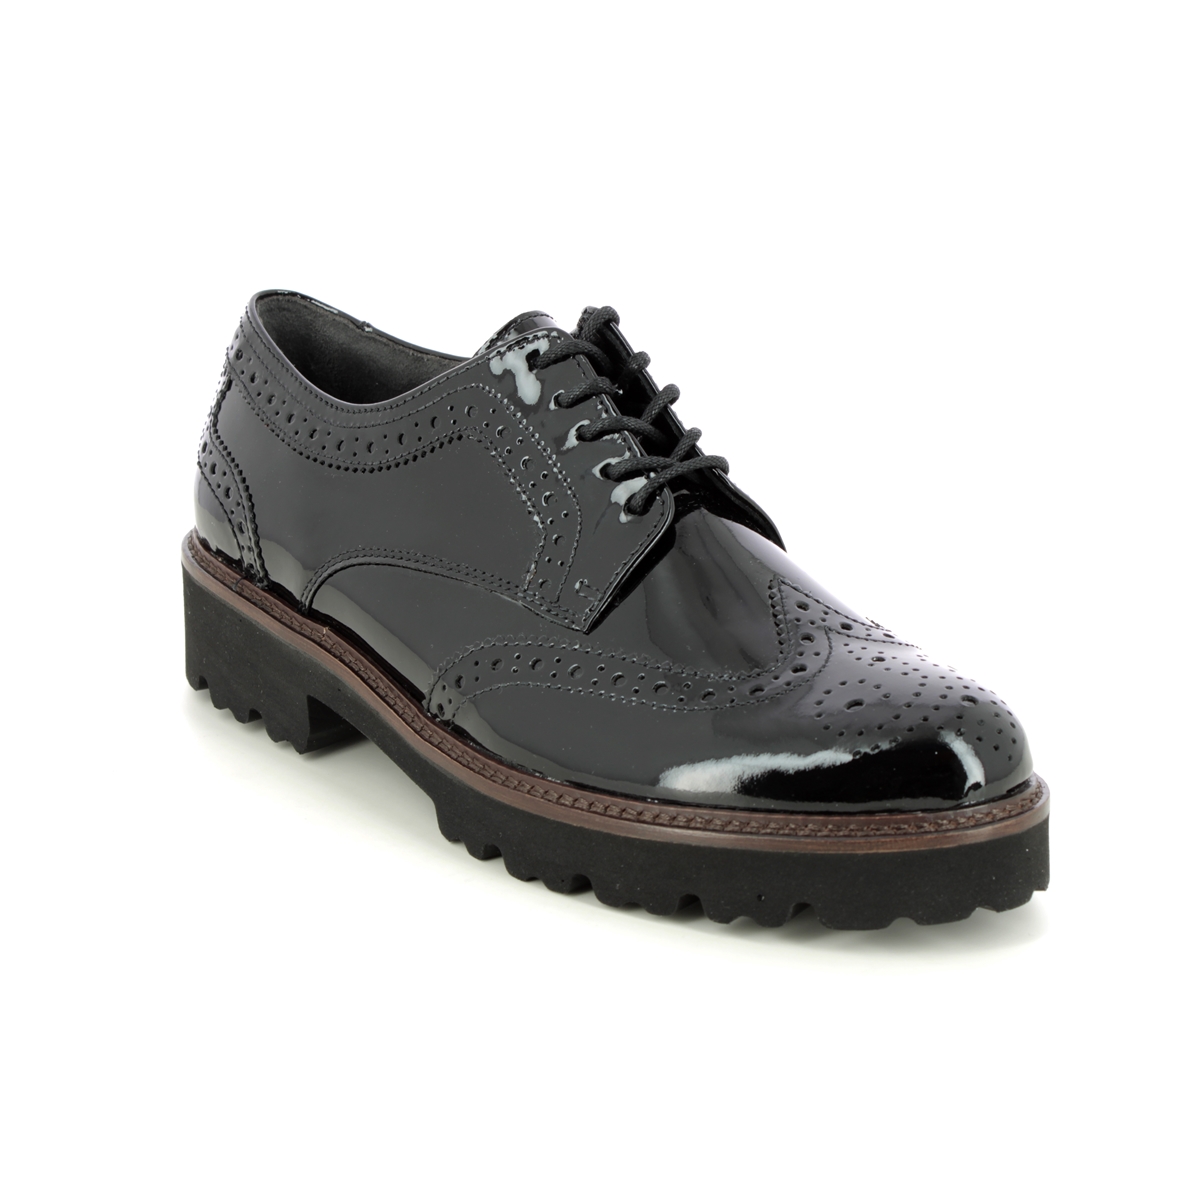 Gabor Sweep Portland Black Patent Leather Womens Brogues 05.244.97 in a Plain Leather in Size 7